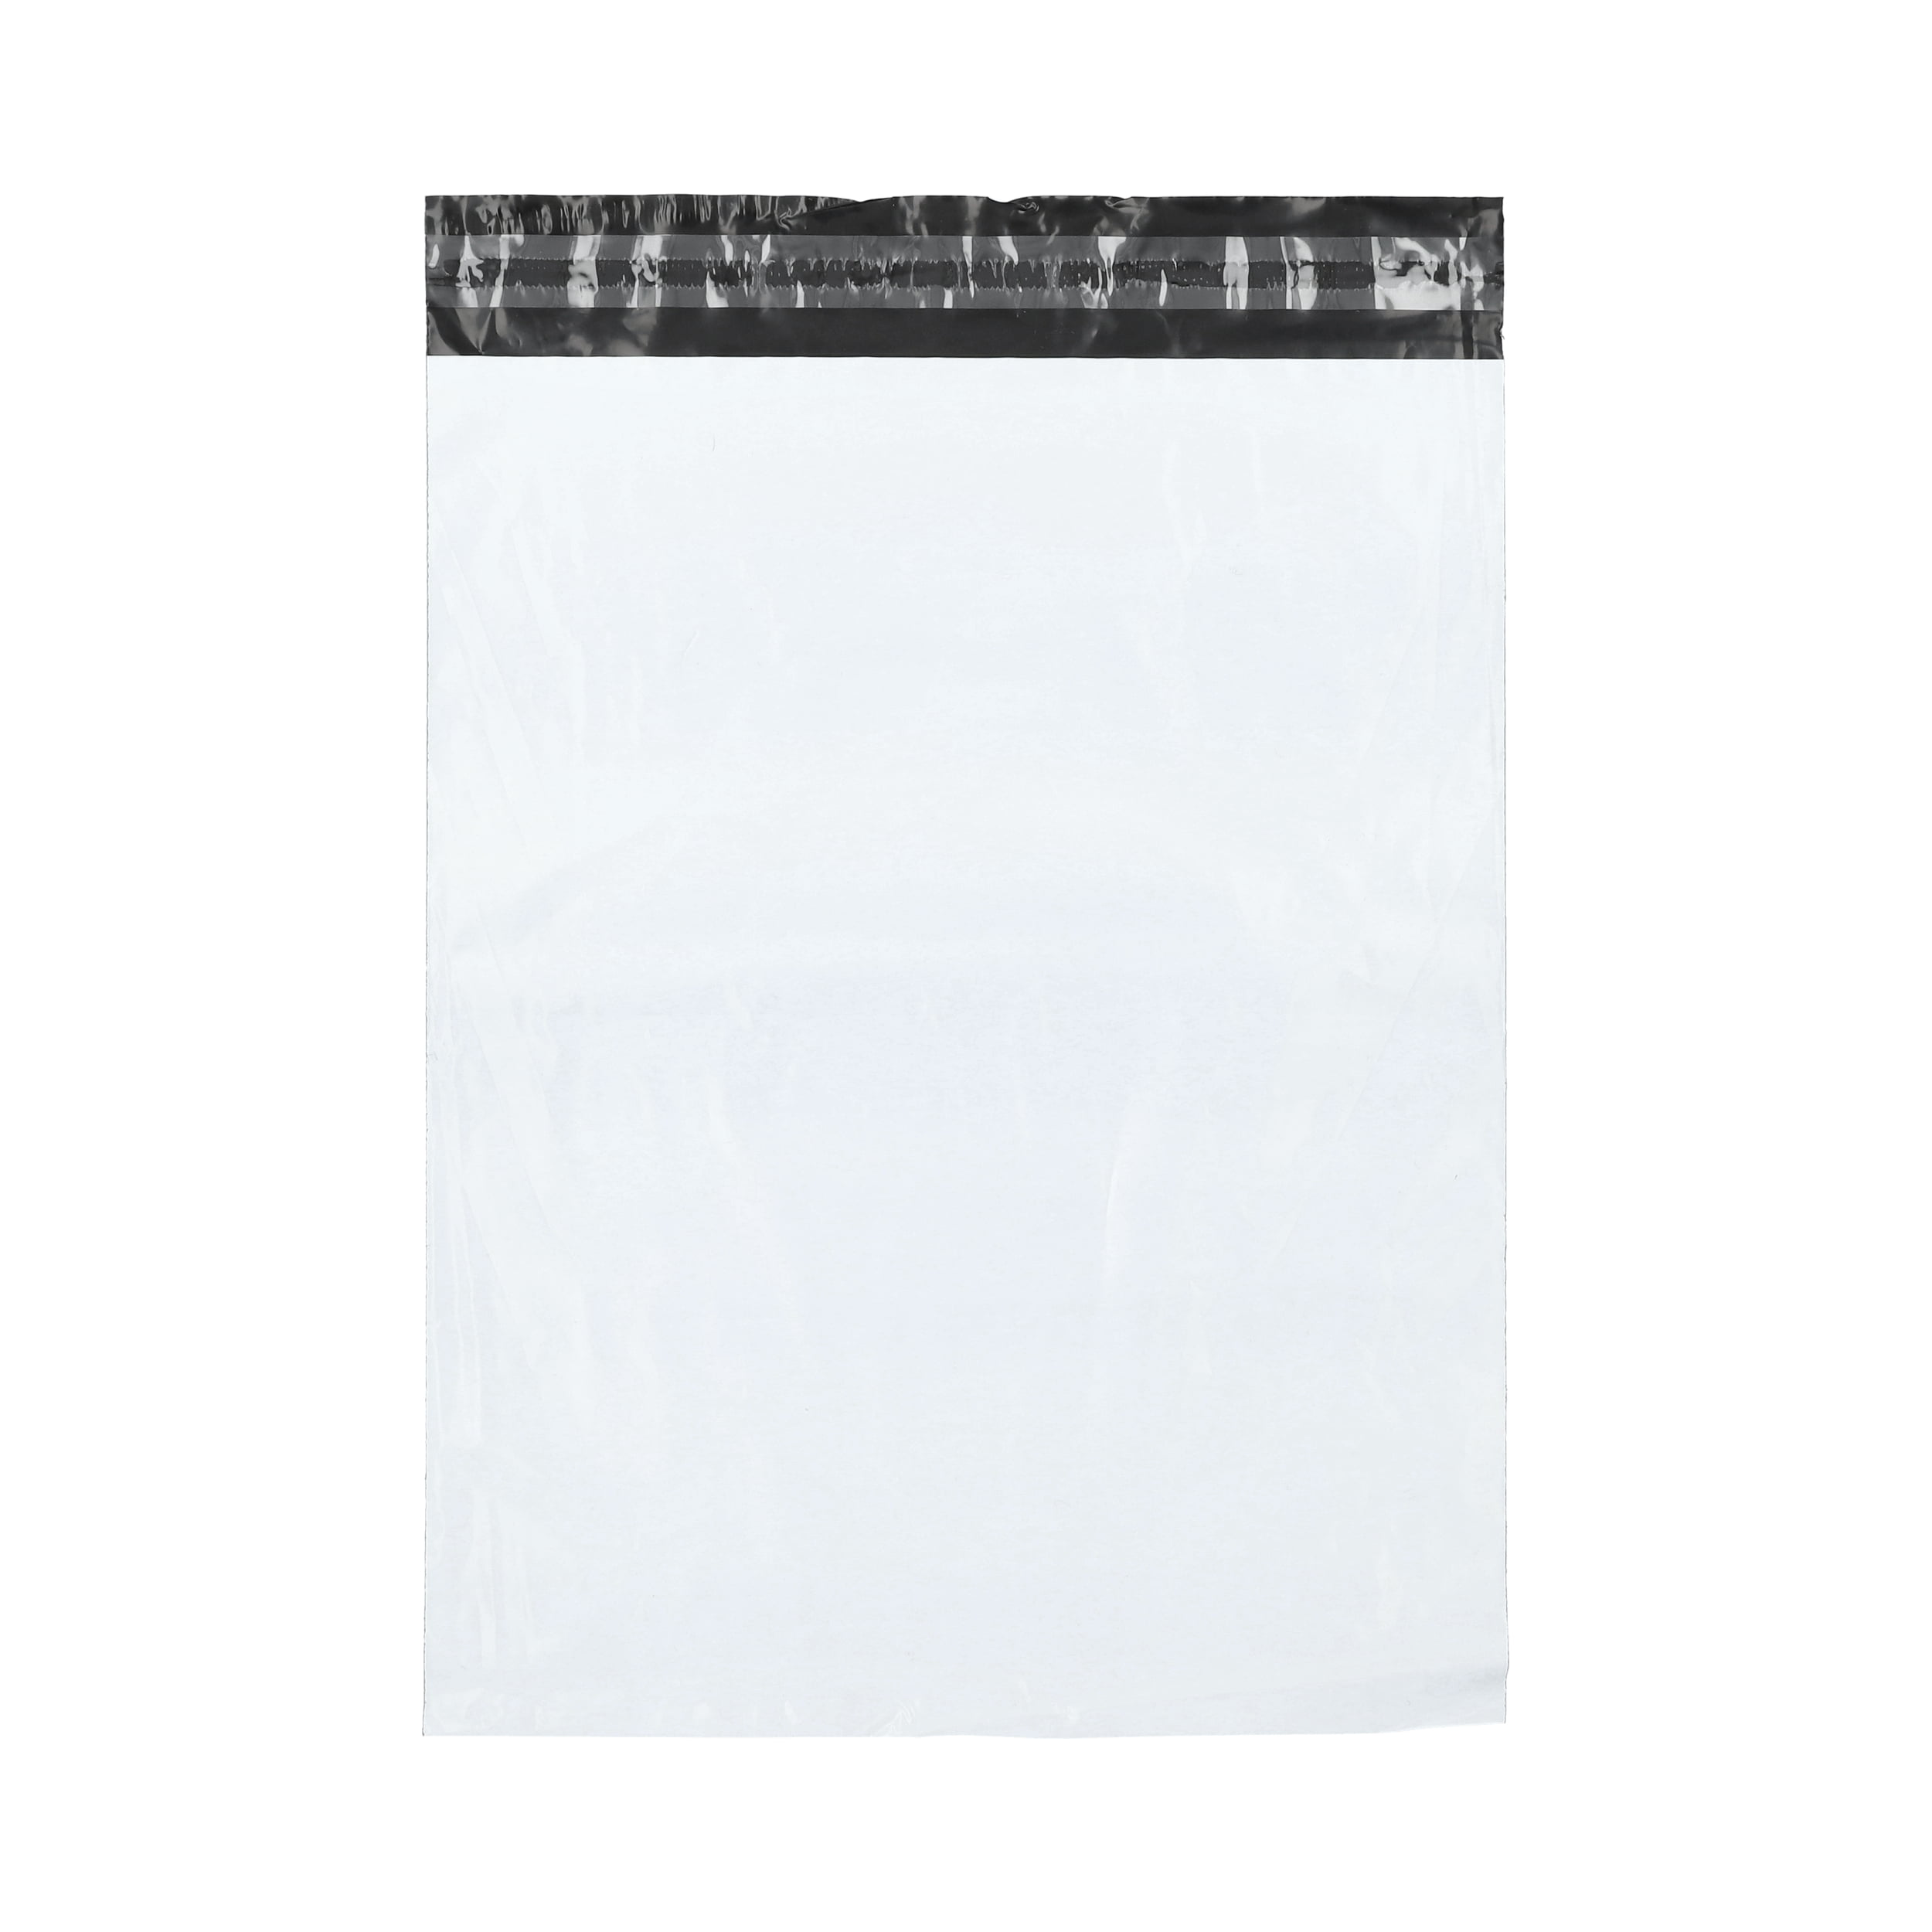 300 12x15.5 POLY MAILERS SELF SEALING ENVELOPES BAGS 12 x 15.5 